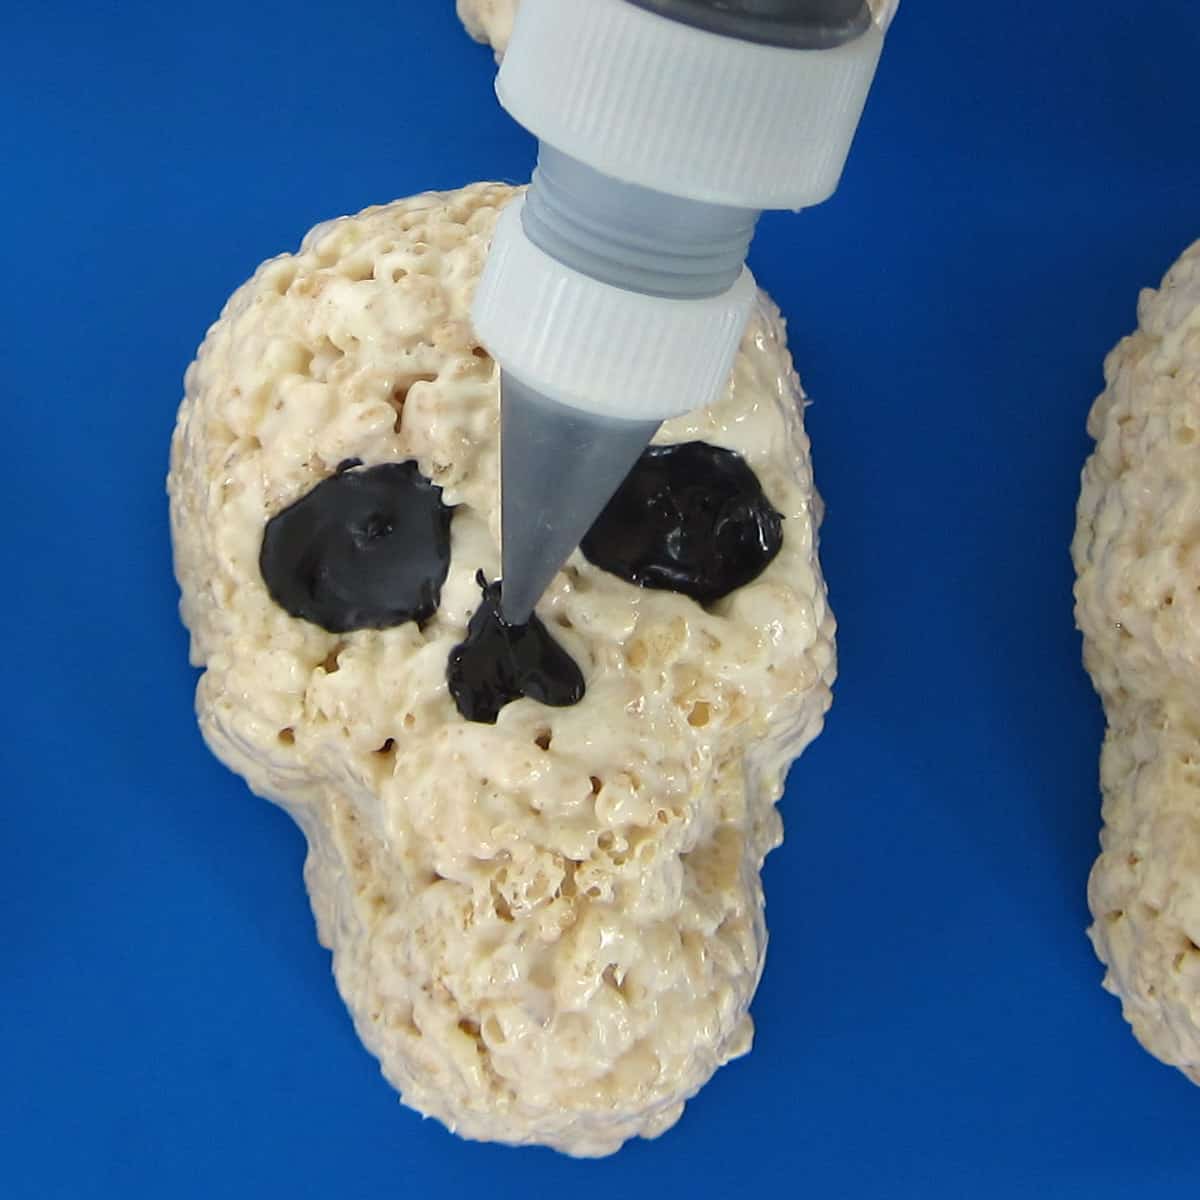 piping black candy melts into the nose cavity of the crispy treat skull.